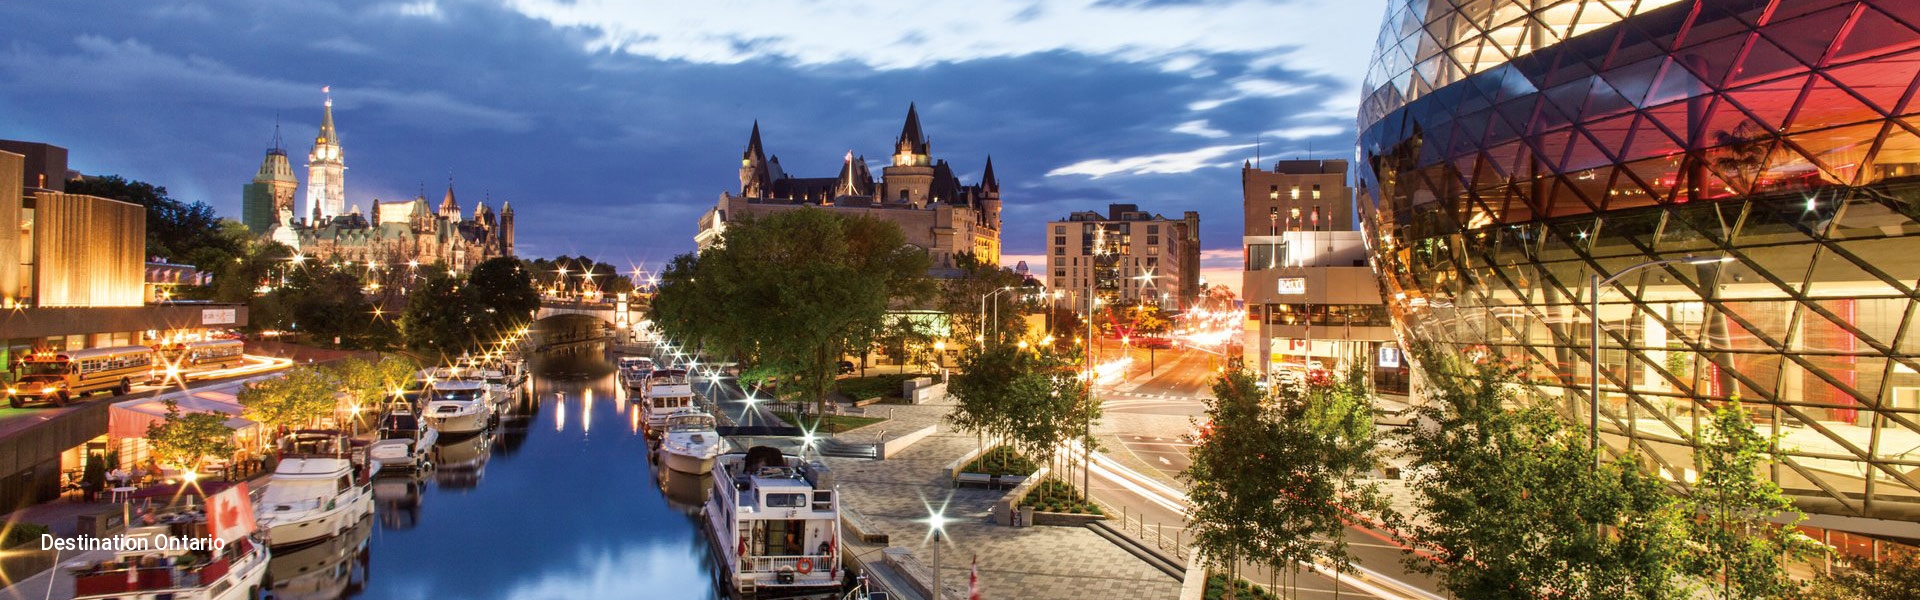 Ottawa and the Rideau Canal